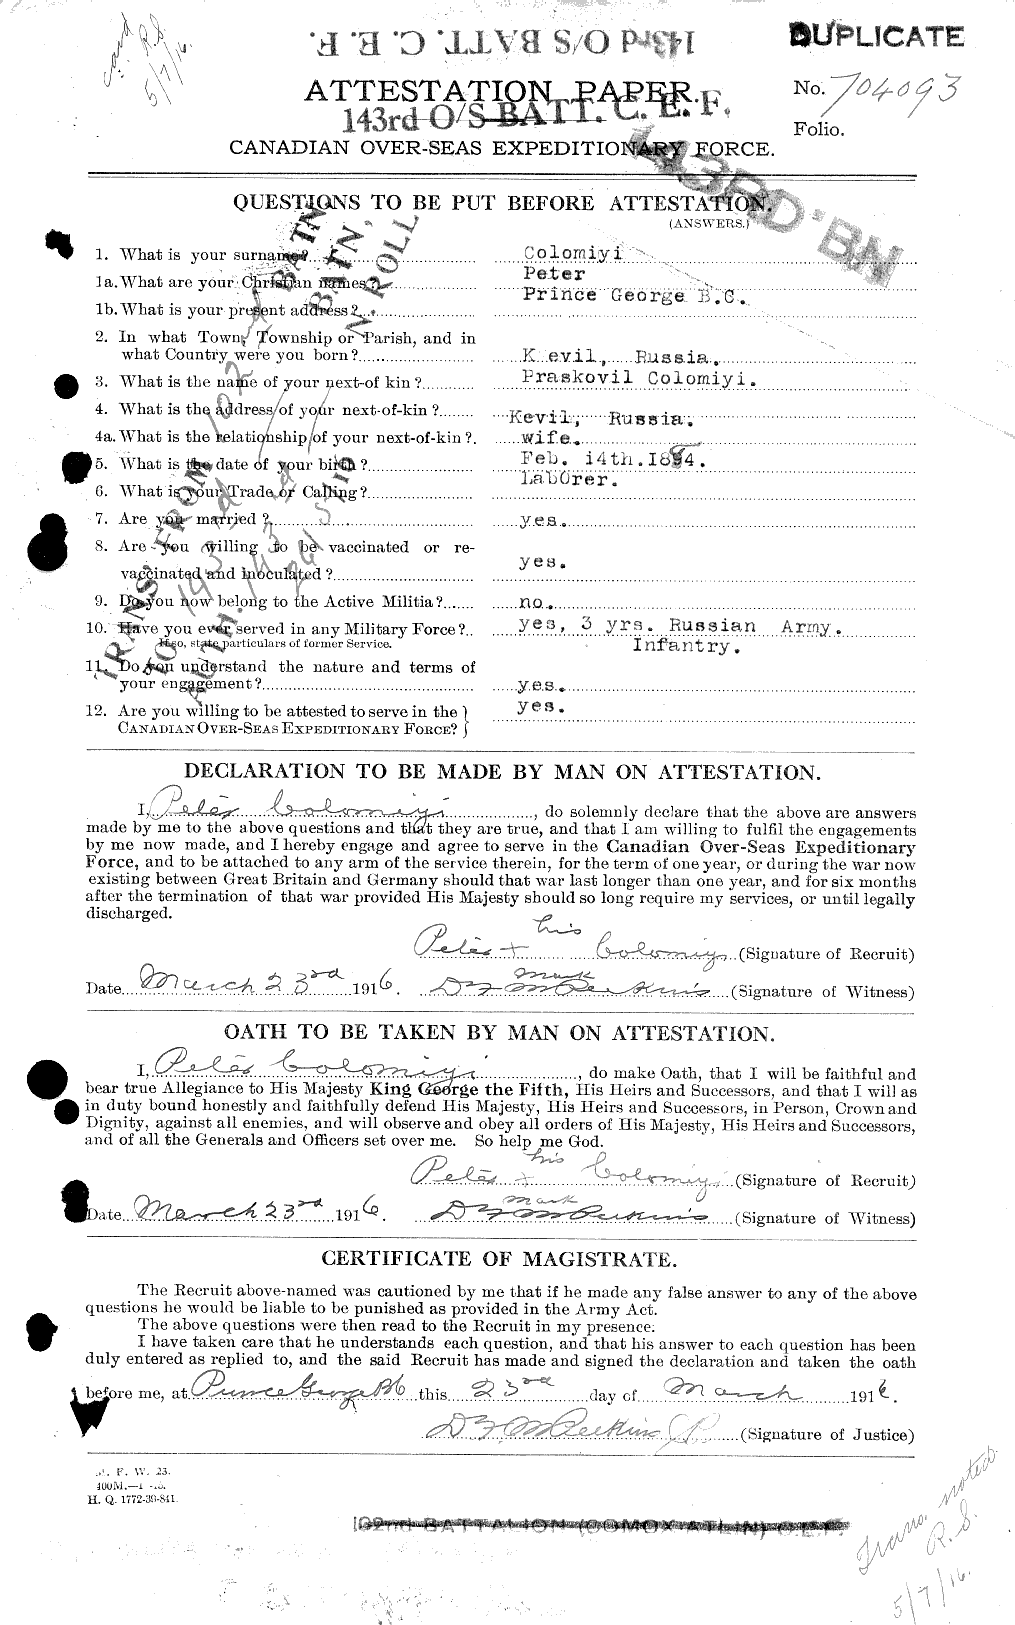 Personnel Records of the First World War - CEF 040771a